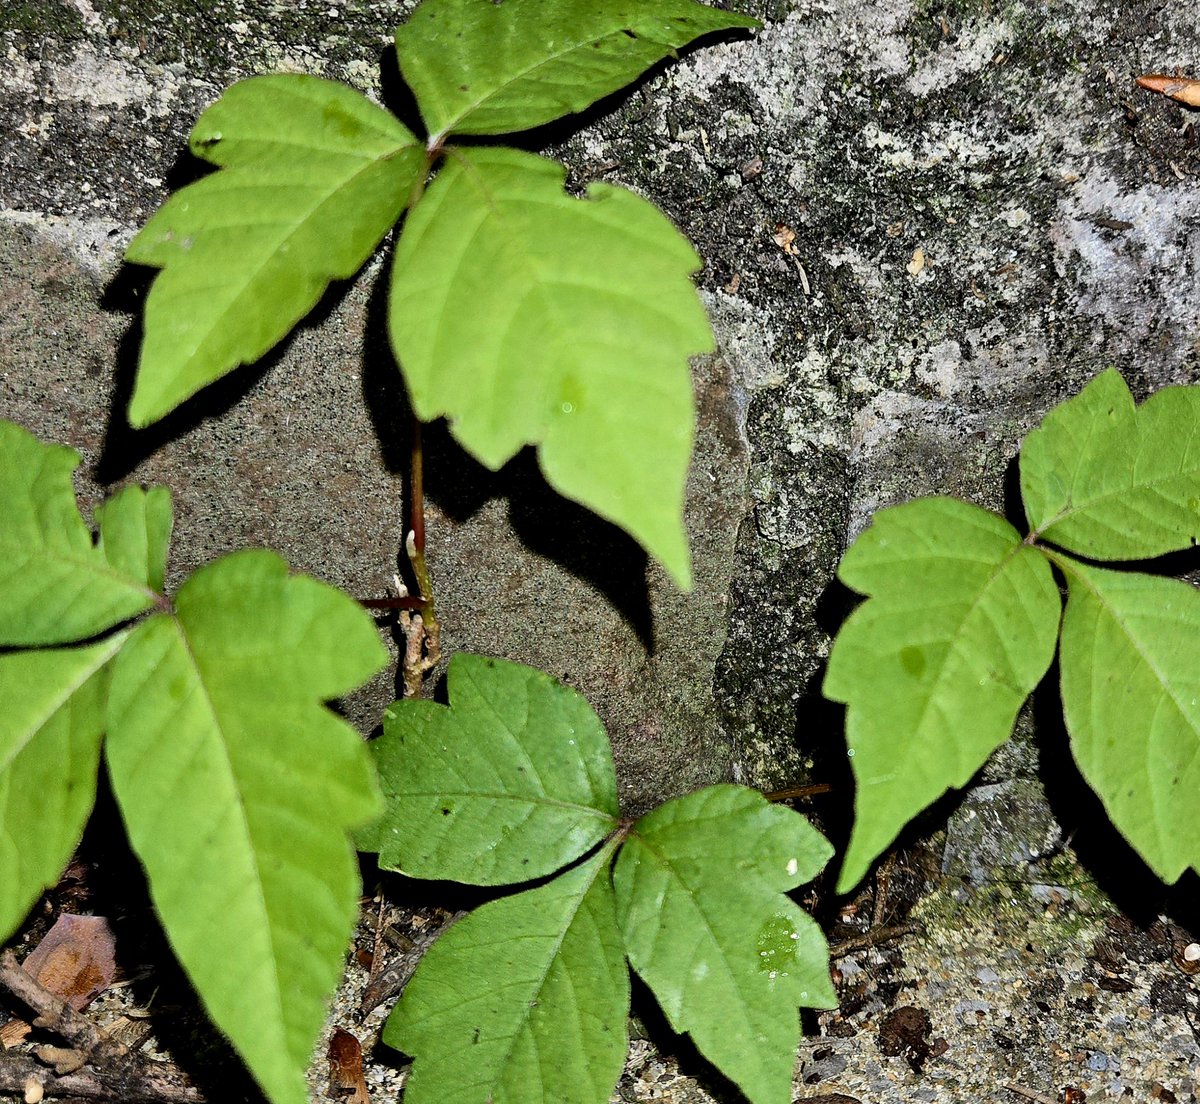 There's something so pretty about spring poison ivy climbing up rock. And yes, my skin is itching just looking at it. Anyway, wish me luck. I have some poison ivy and honeysuckle trying to take over, so I'm knocking it back today. #mountainlife